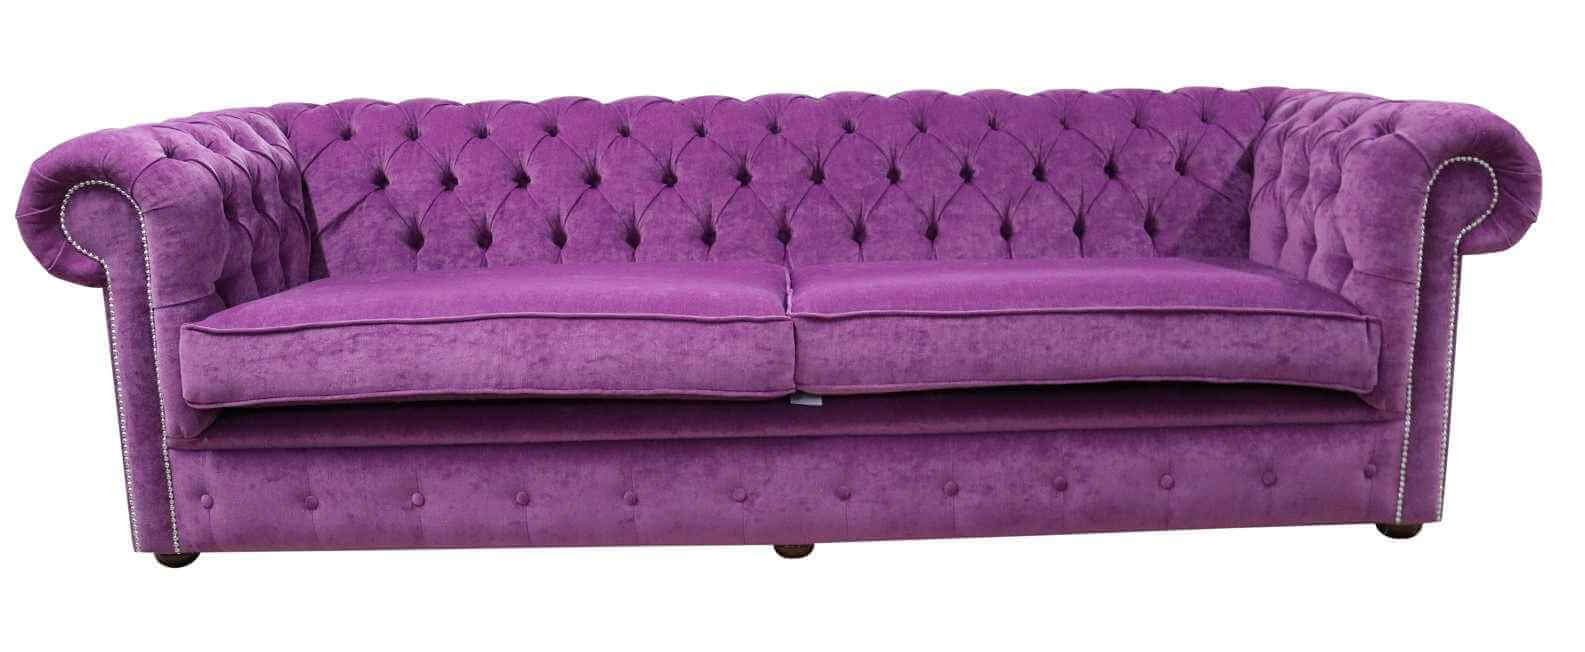 Selling Your Chesterfield Sofa Finding a New Home for Timeless Elegance  %Post Title